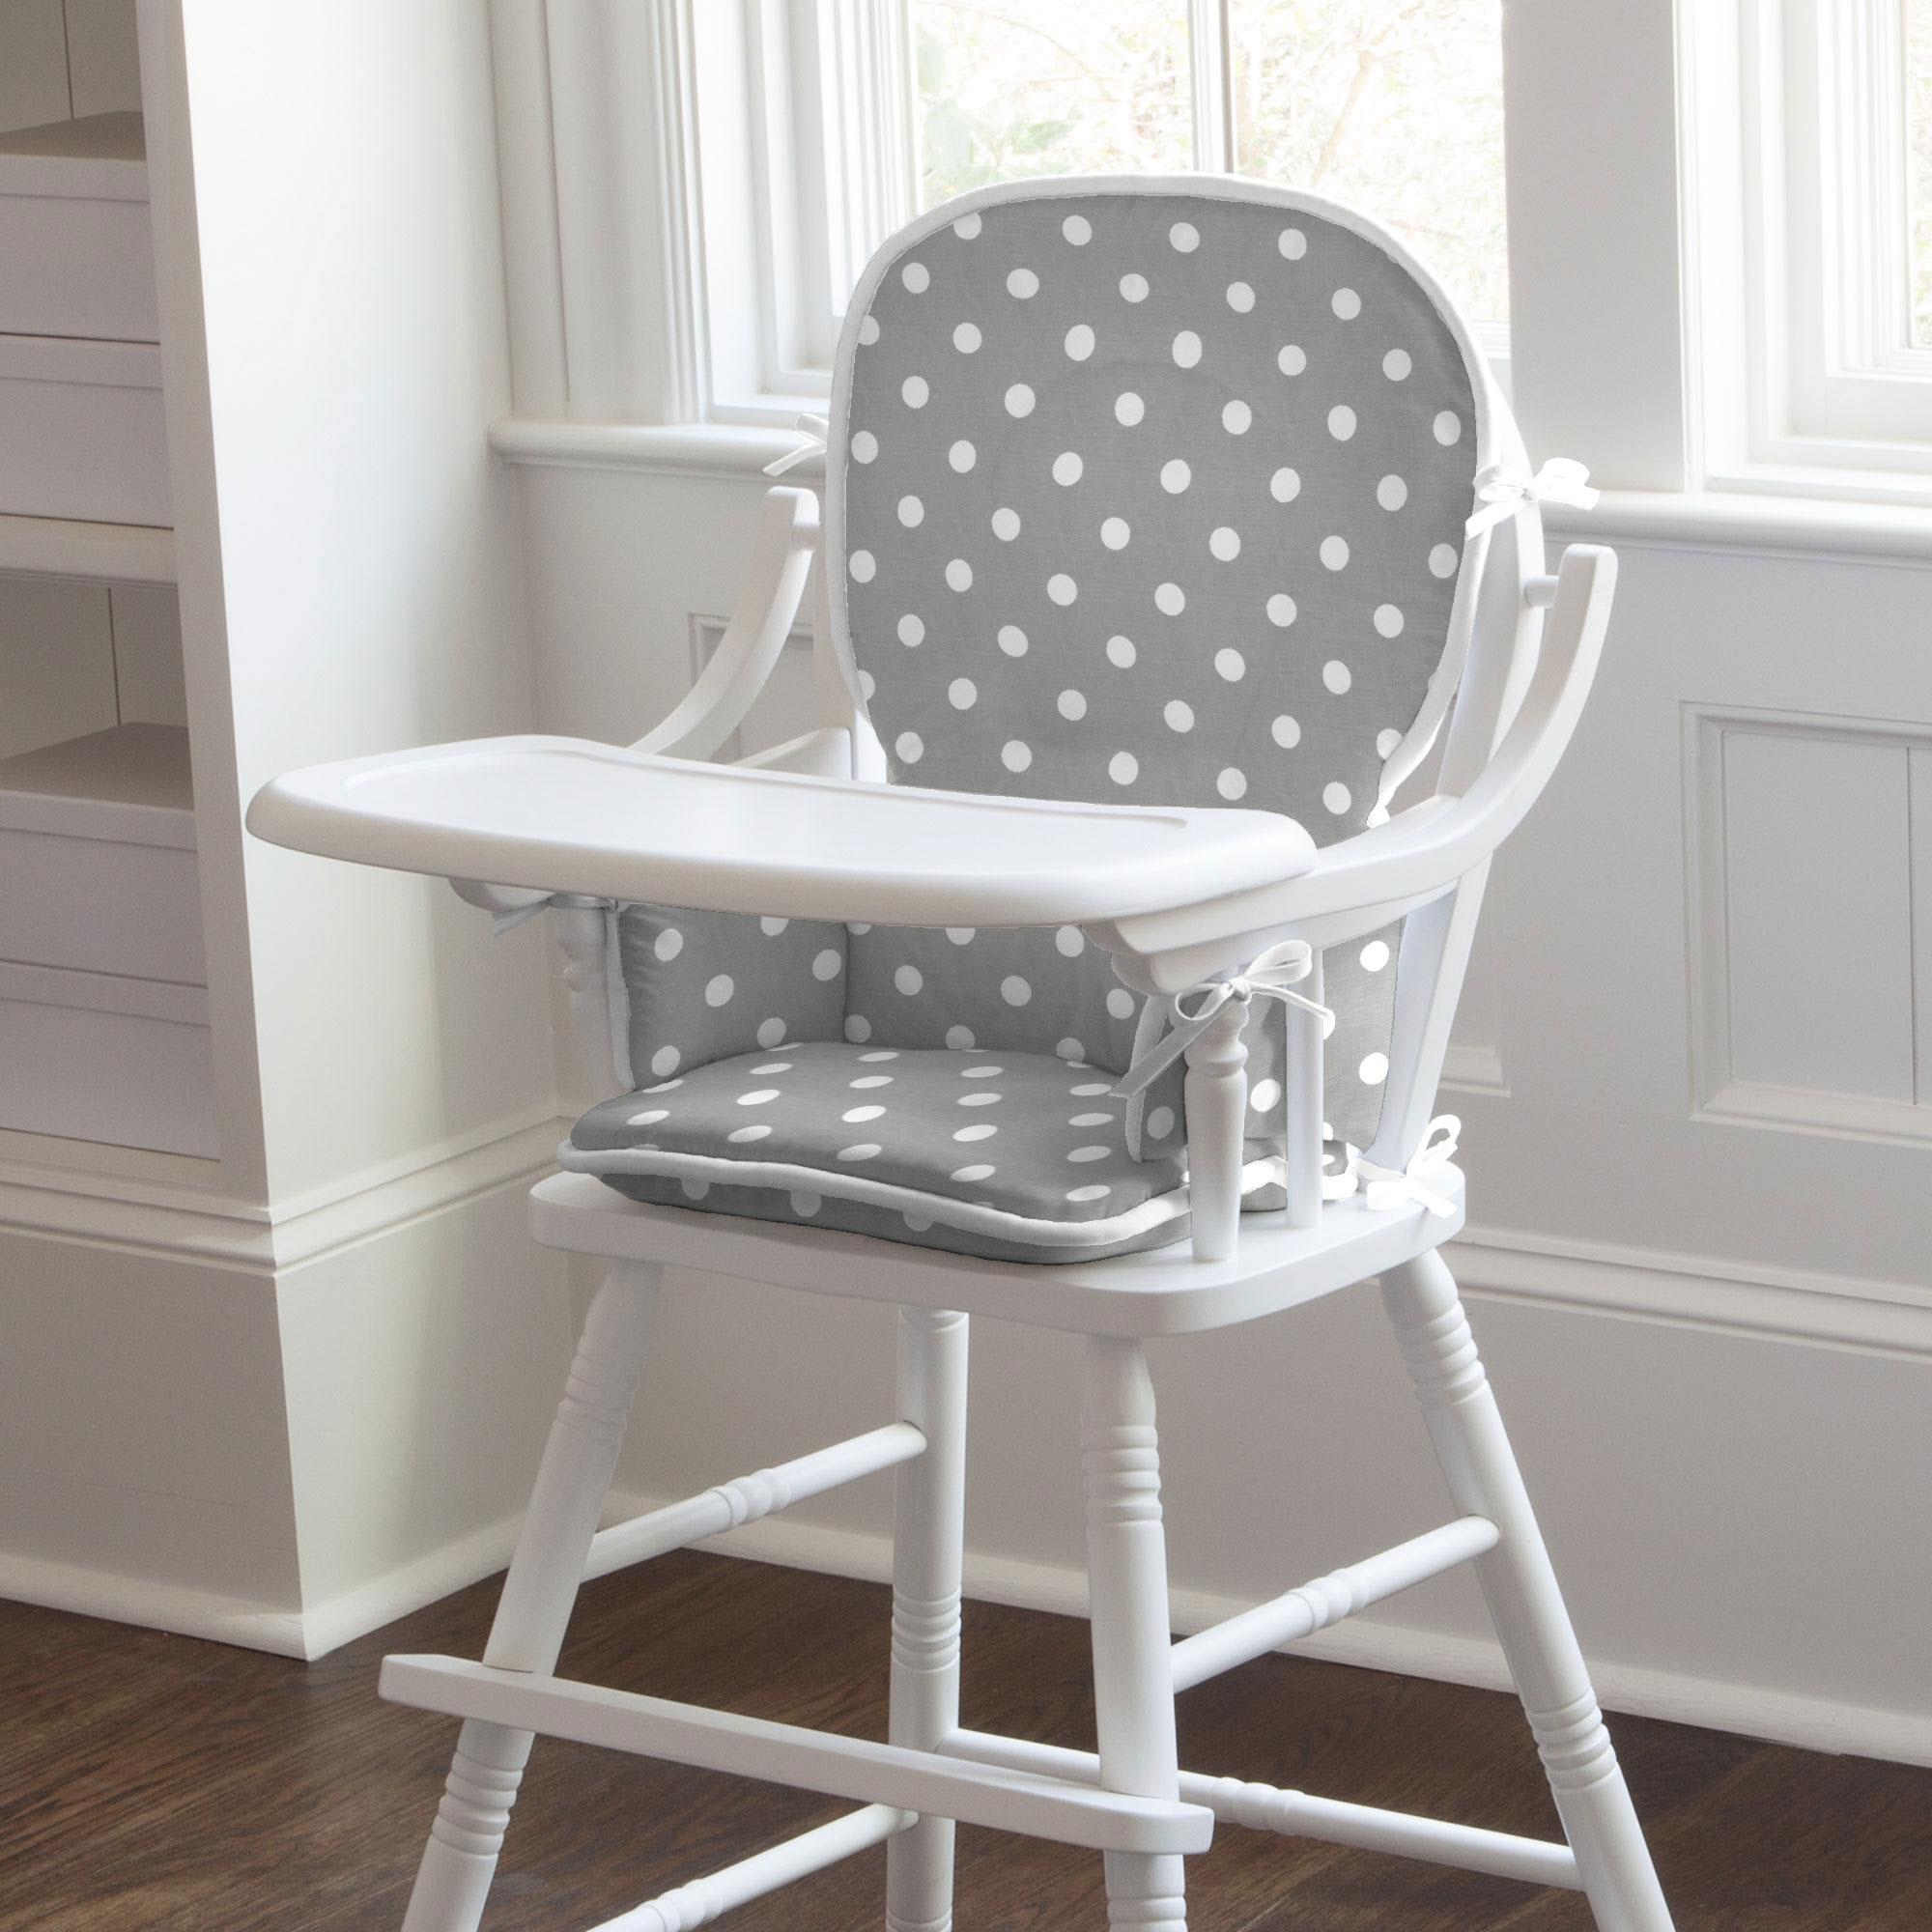 wooden high chair for babies